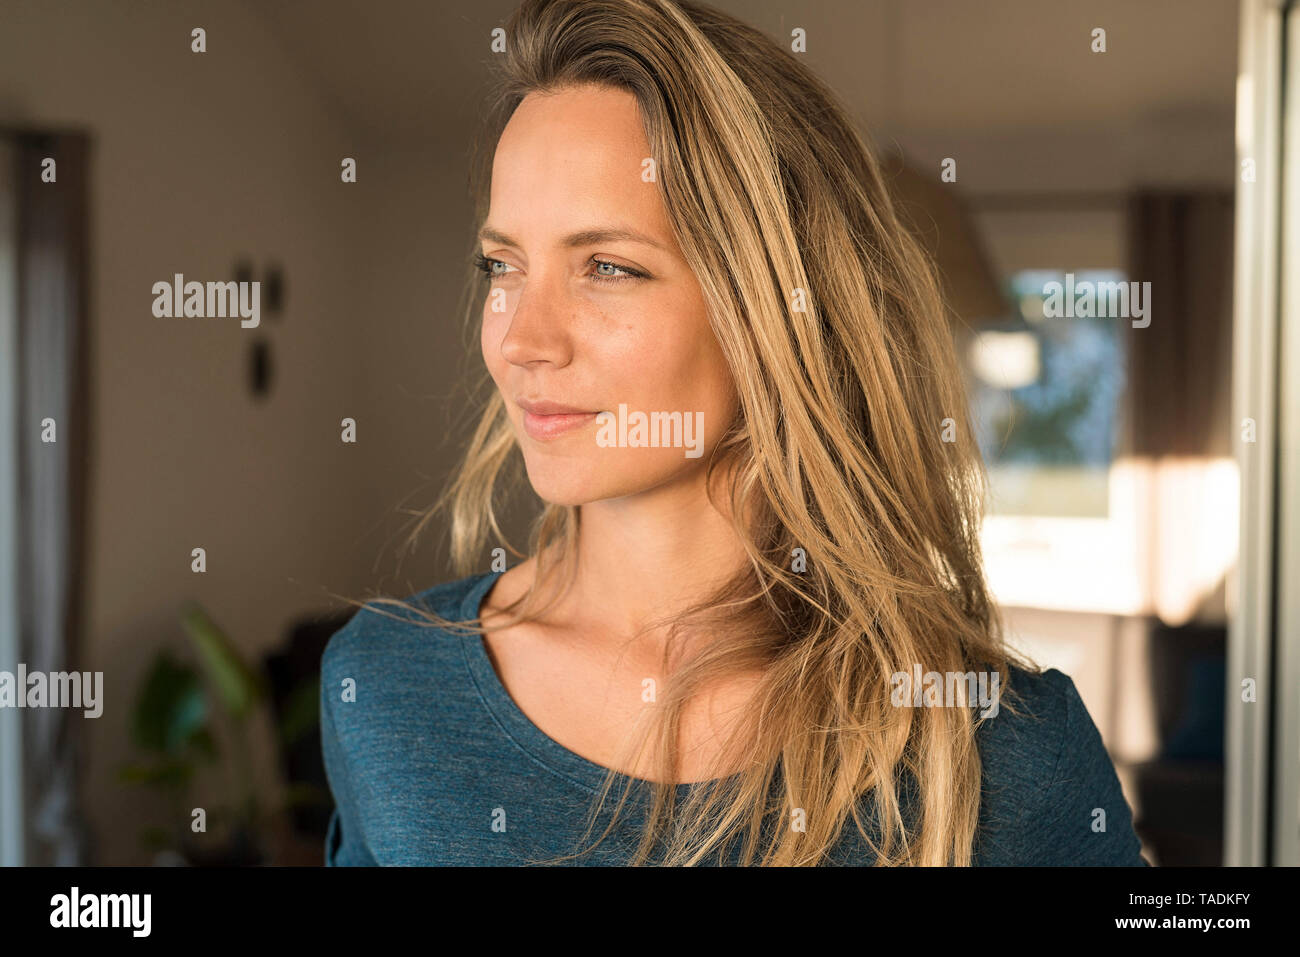 Portrait of blond woman at home looking sideways Stock Photo